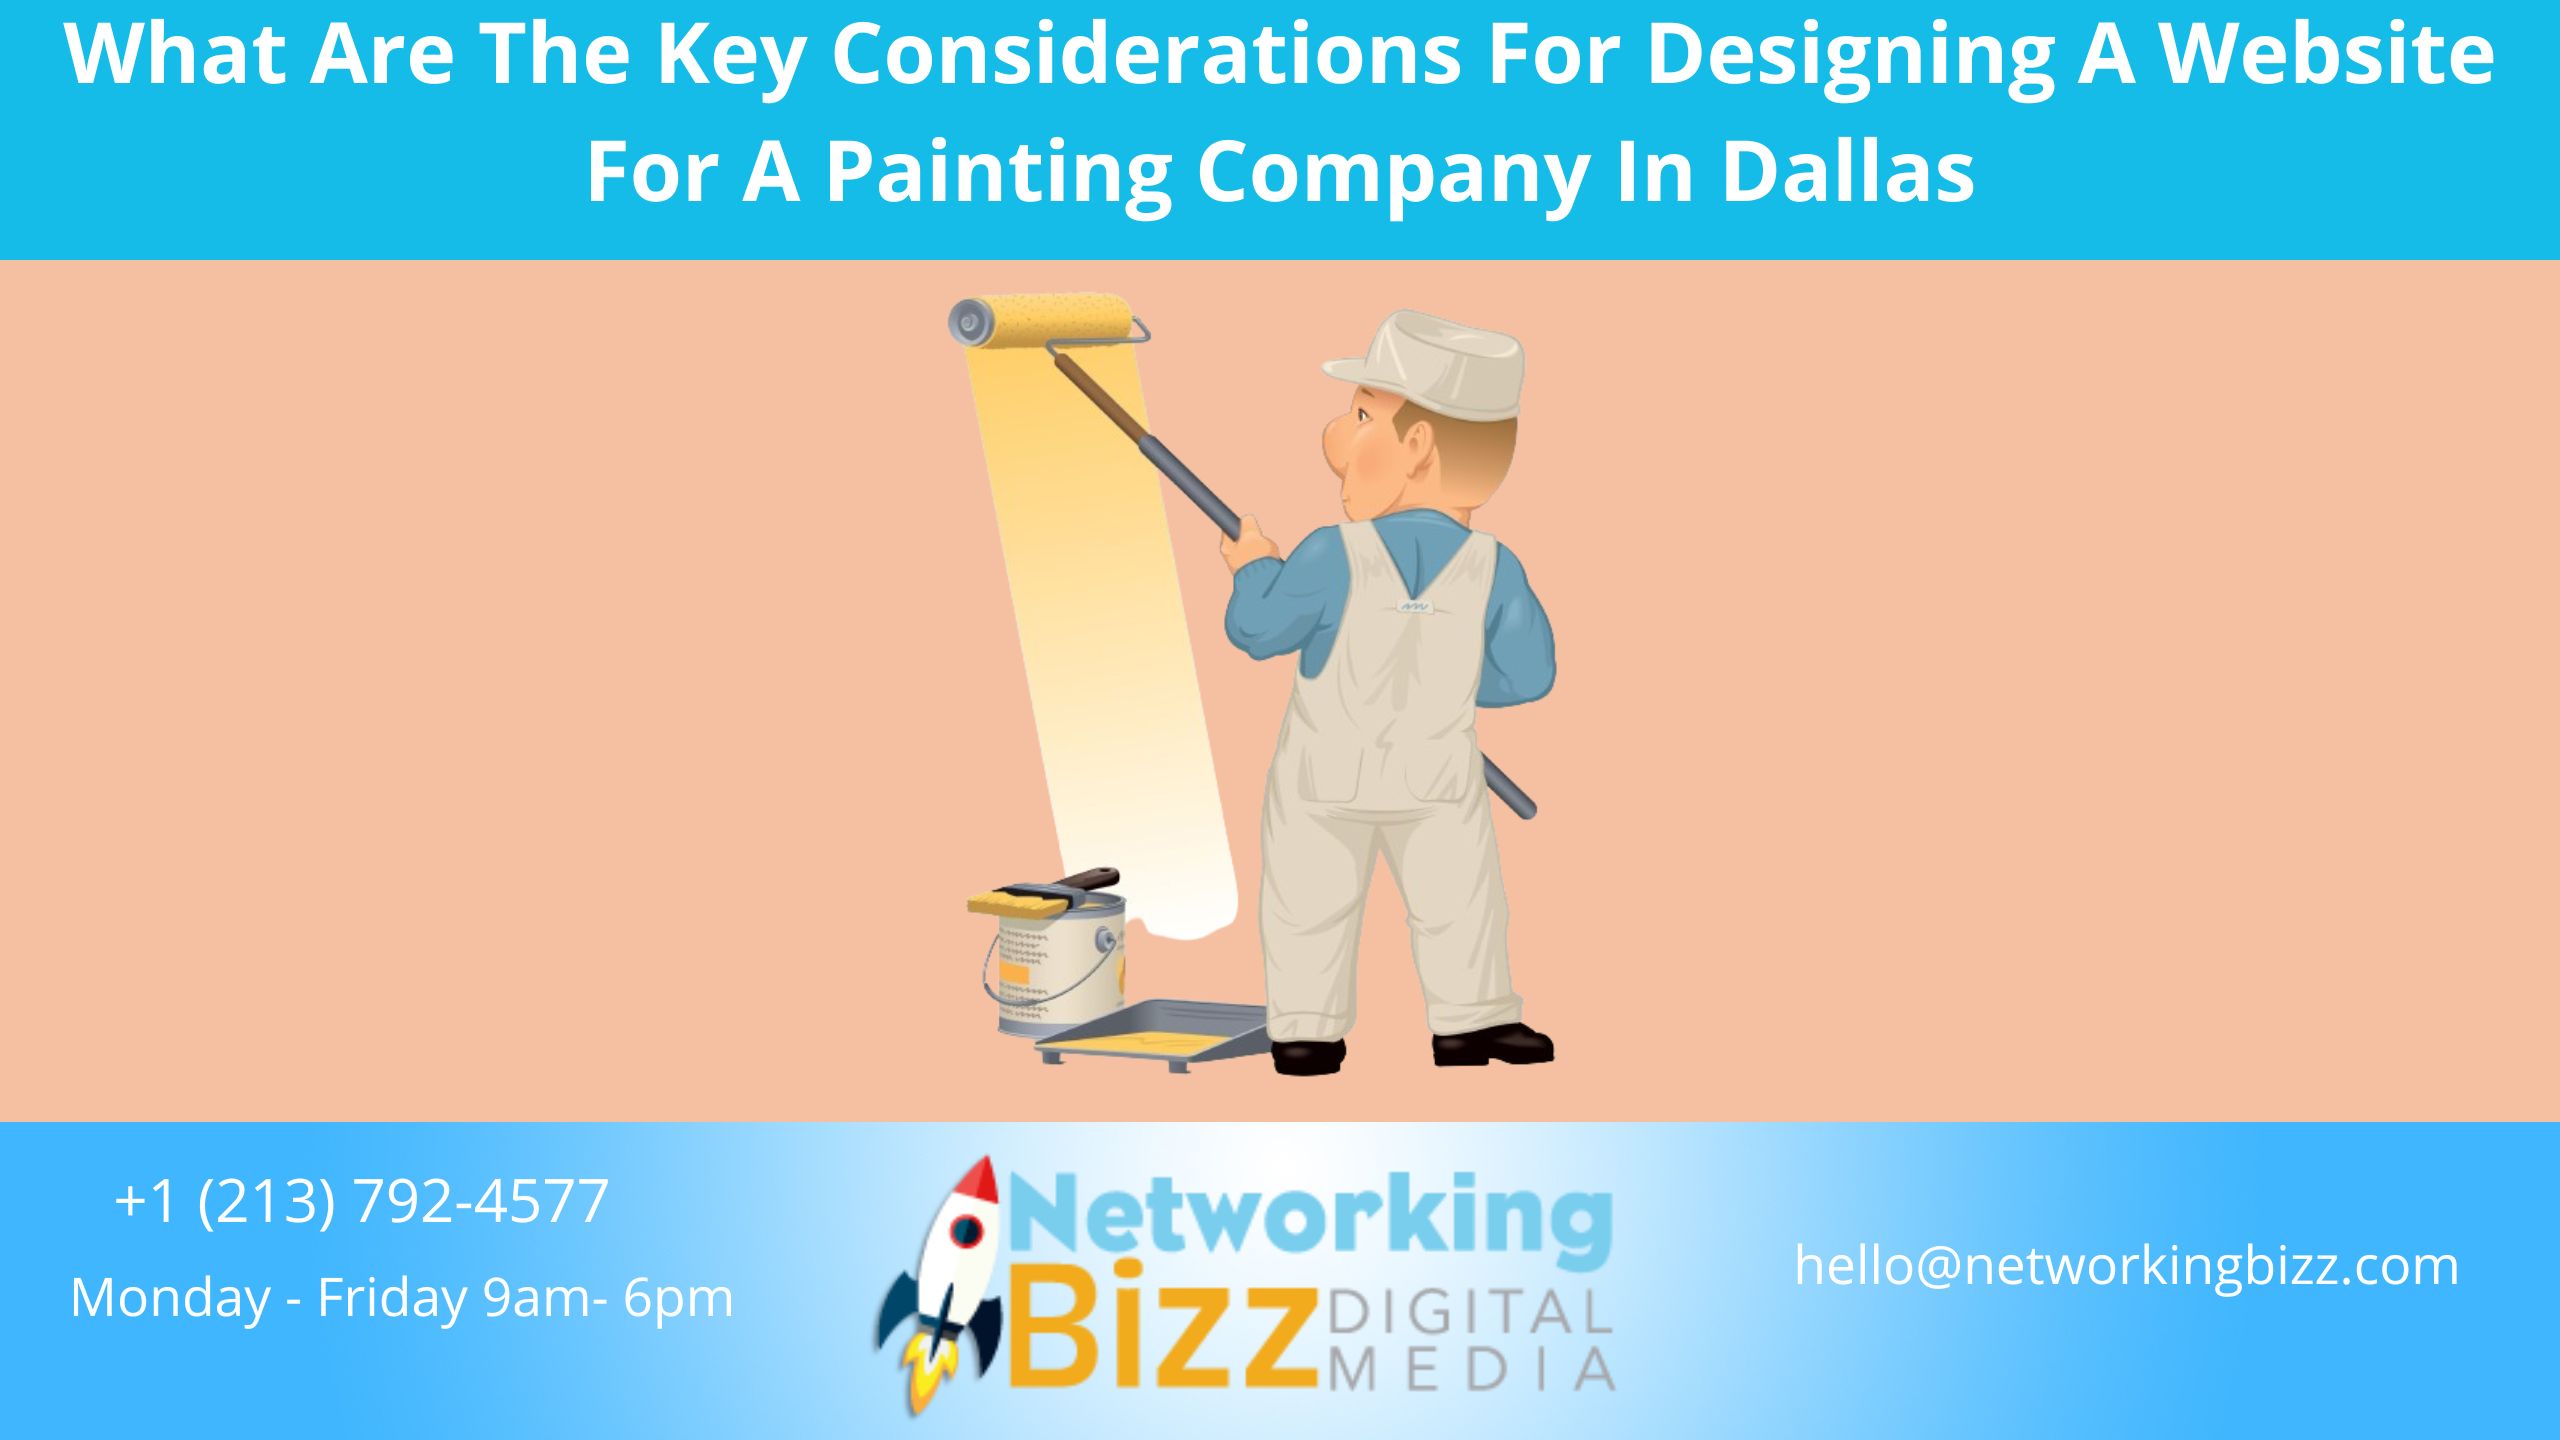 What Are The Key Considerations For Designing A Website For A Painting Company In Dallas